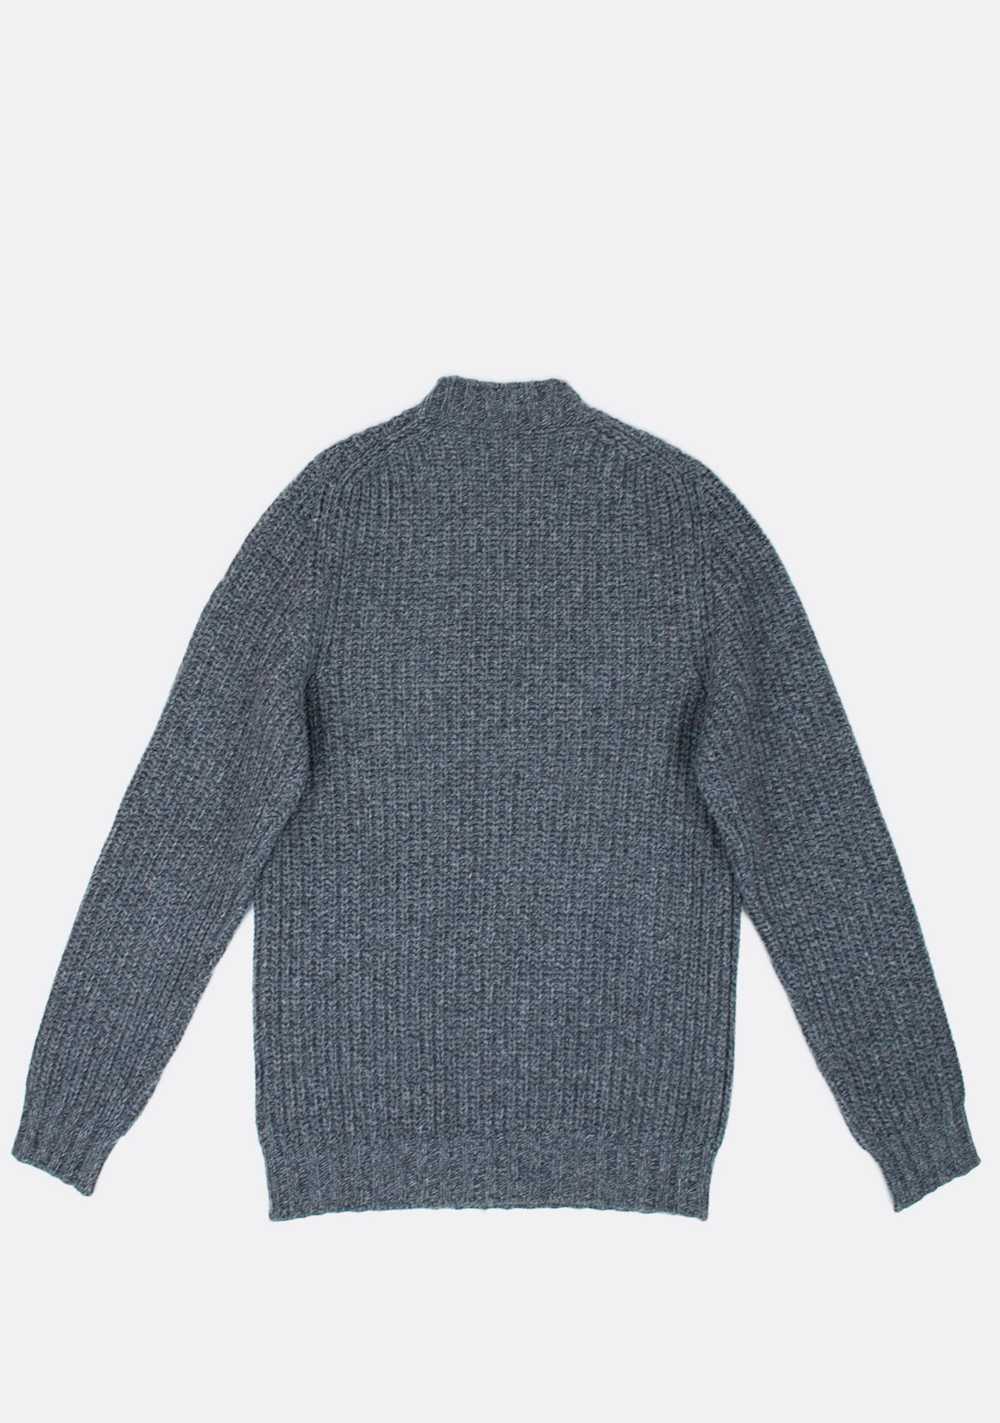 Moncler Moncler Maglione Tricot Girocollo Wool Bl… - image 5